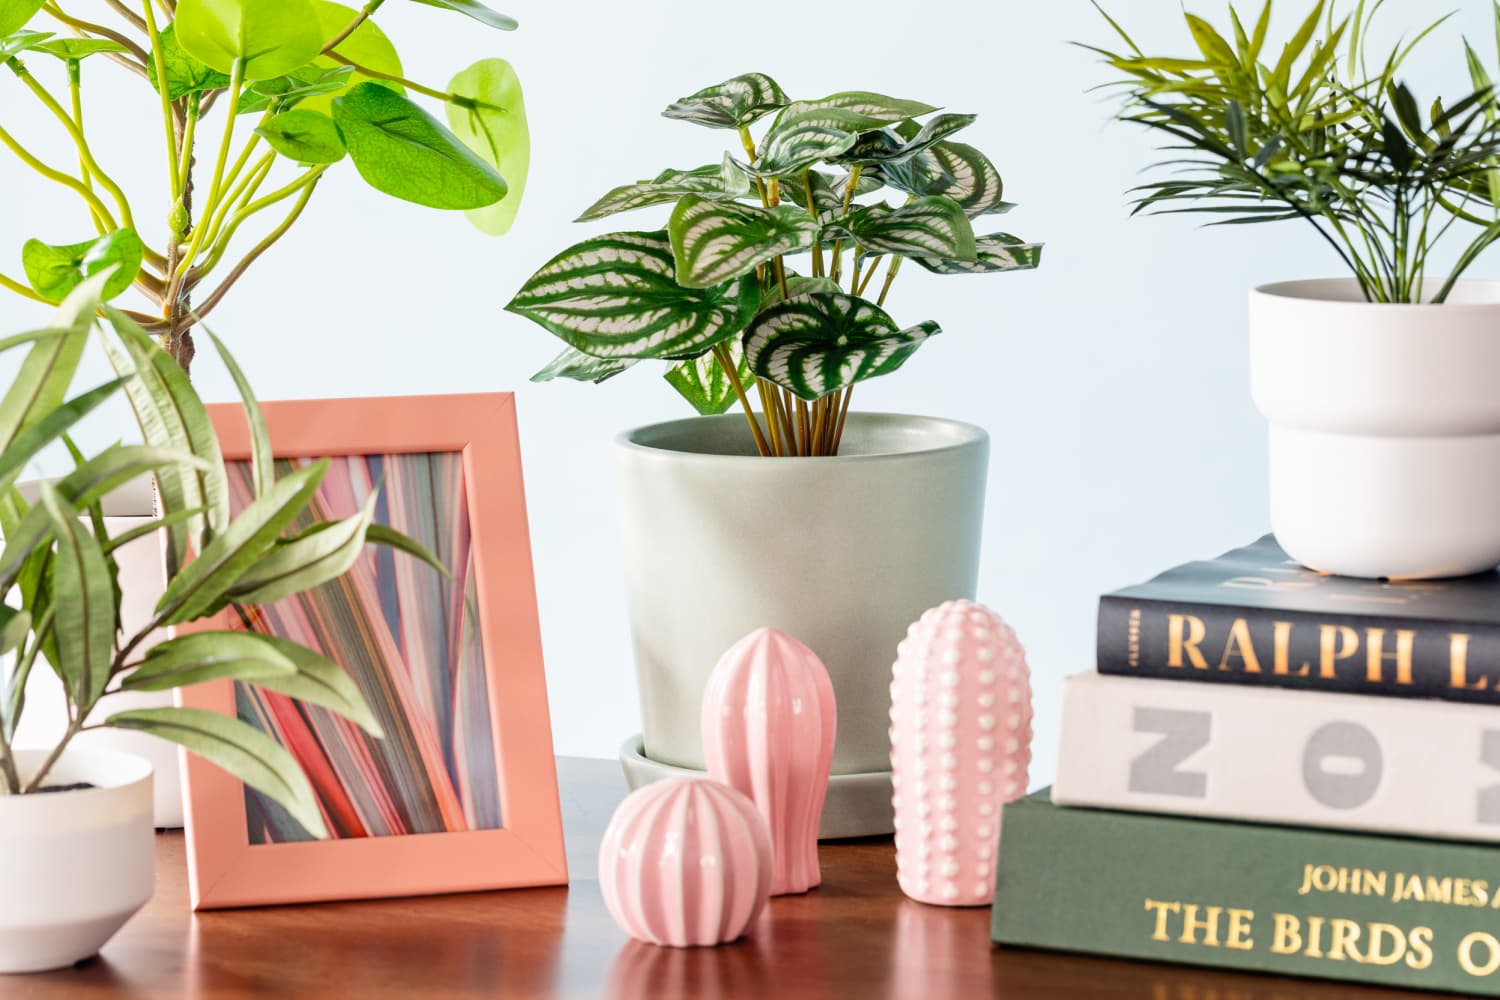 Real vs Fake Plants For The Workplace – Nearly Natural